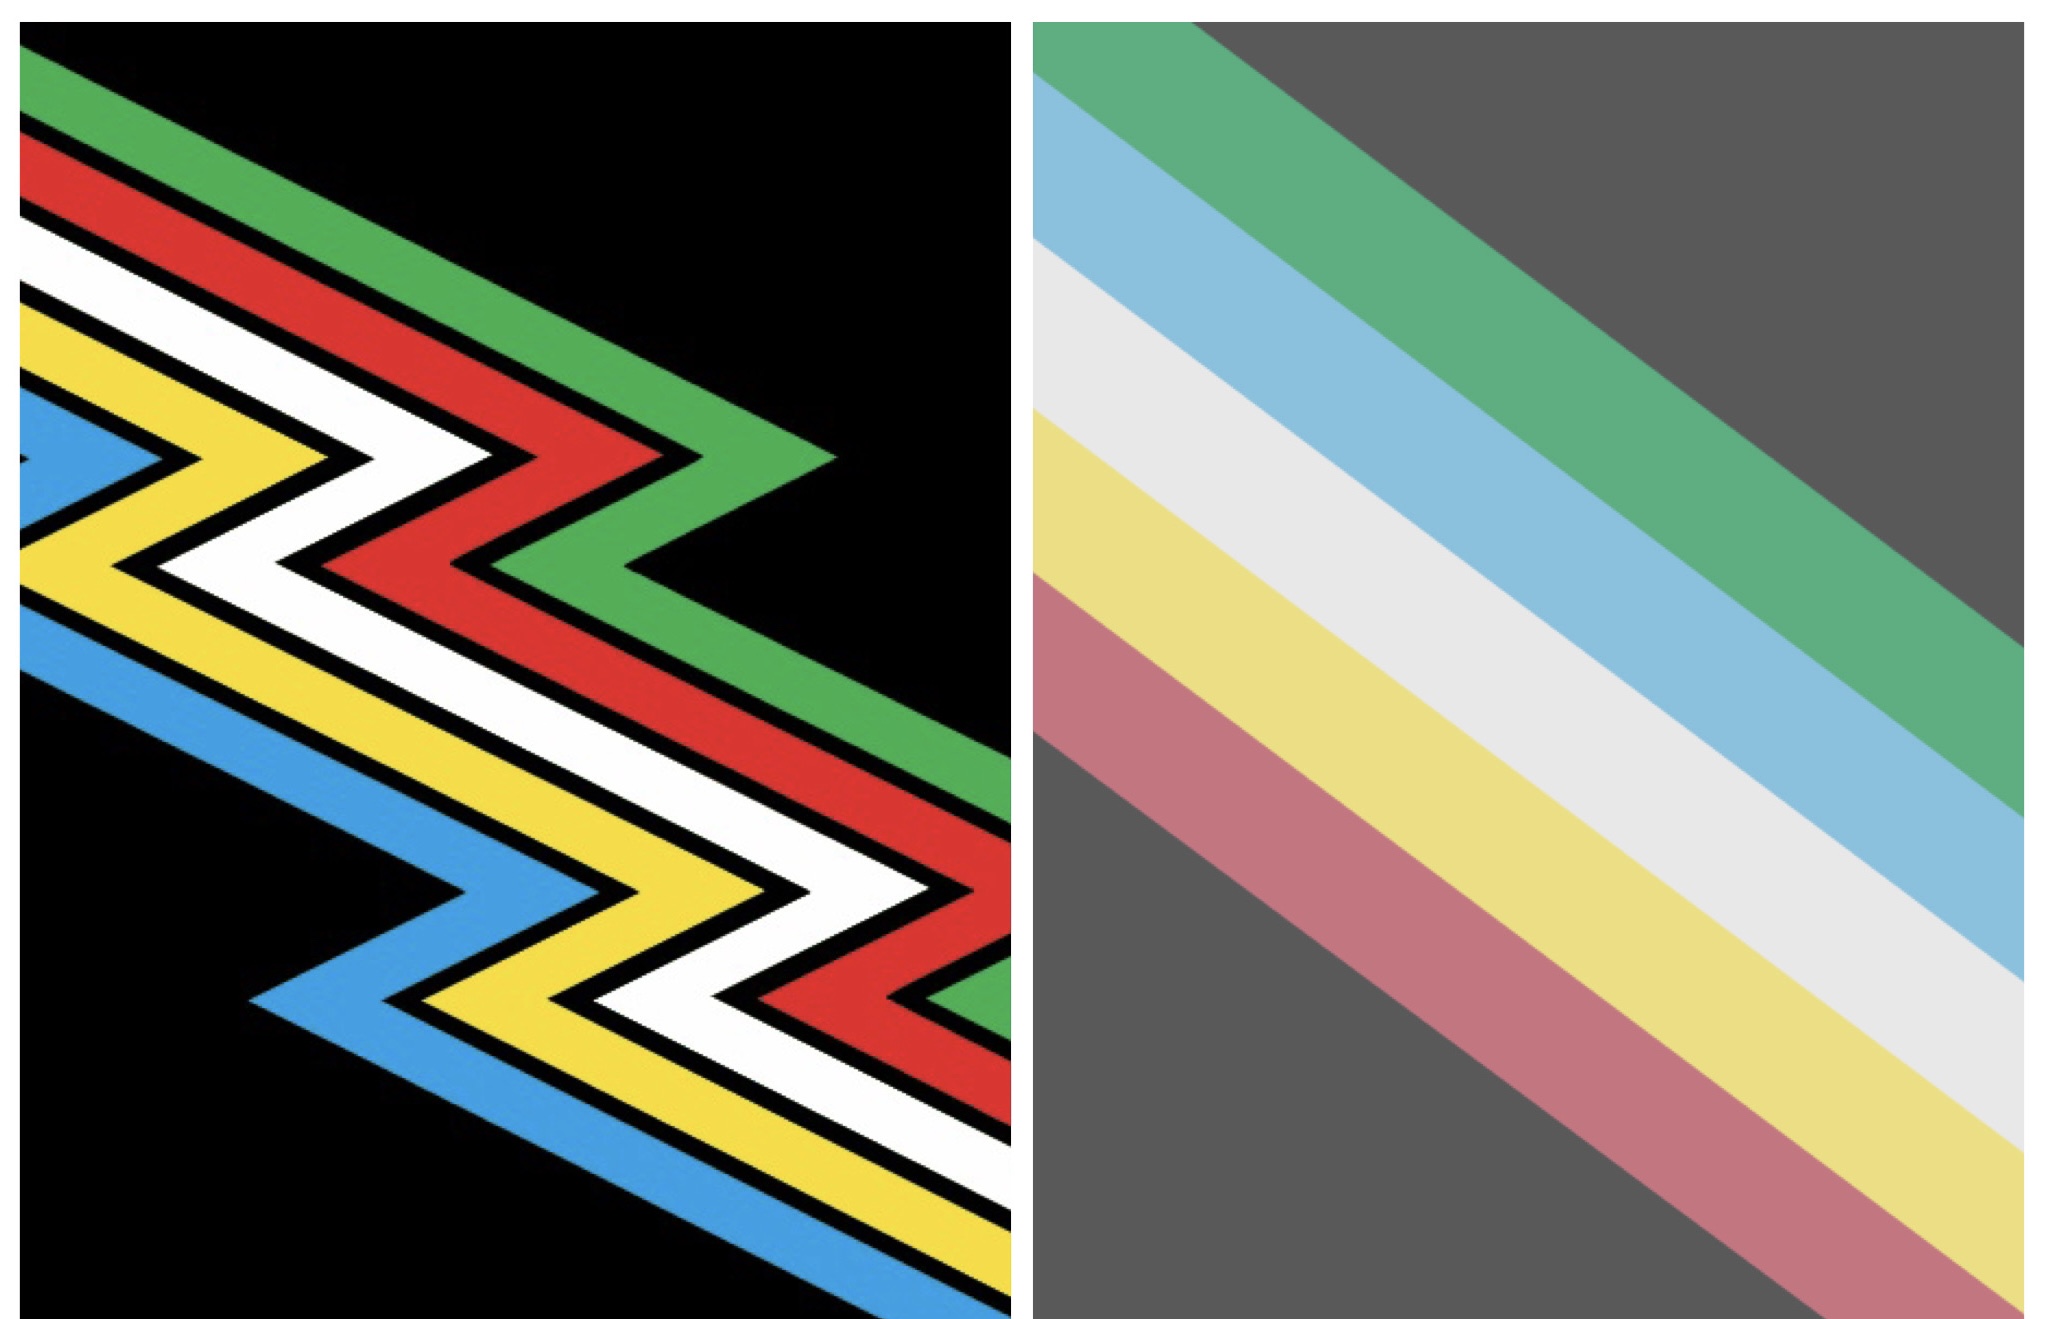 Thanks to input from the disability community, the original design of the disability pride flag (left) was updated in 2021 (right) to be more accessible.